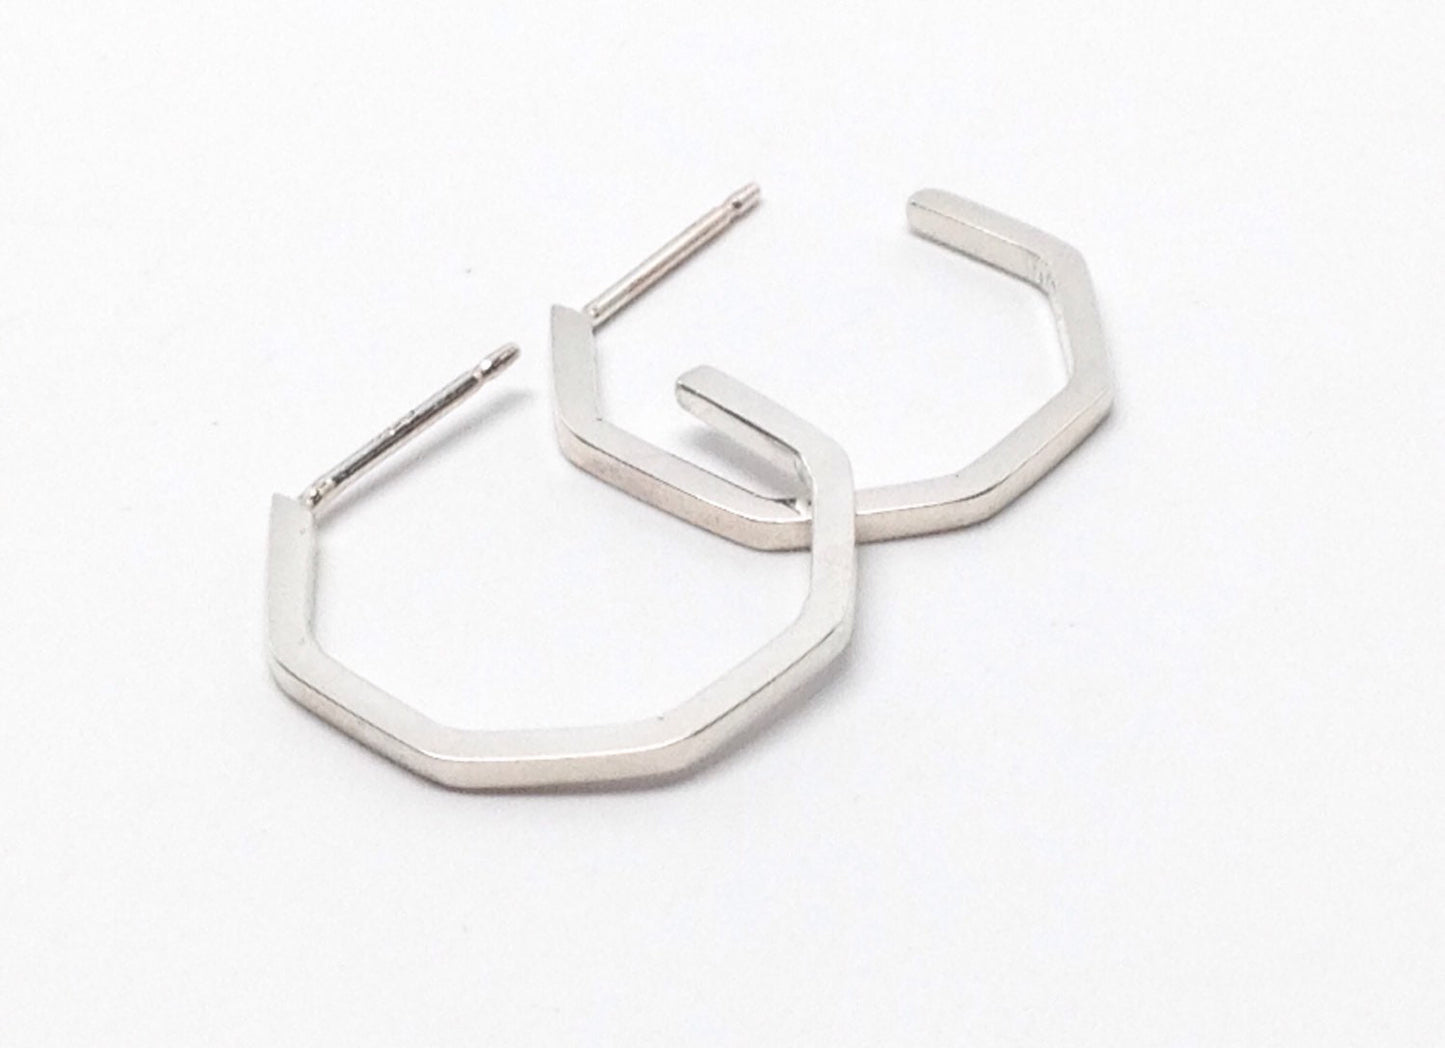 A pair of small sterling silver handmade geometric hoop earrings on a white background